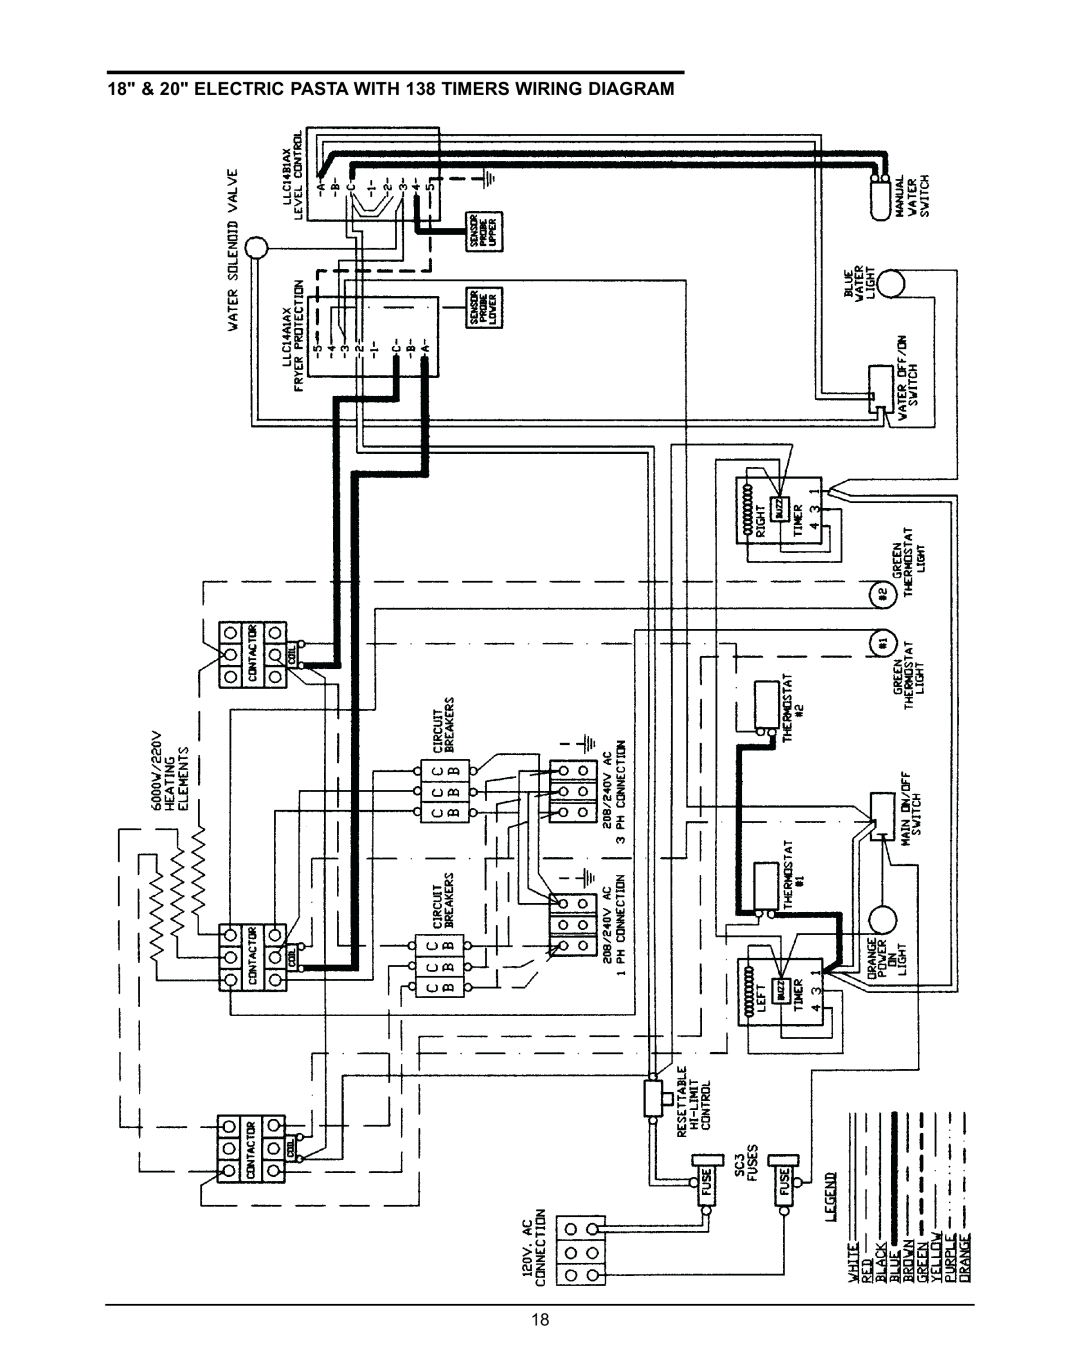 Keating Of Chicago 240V service manual 18 & 20 ELECTRIC PASTA WITH 138 TIMERS WIRING DIAGRAM 